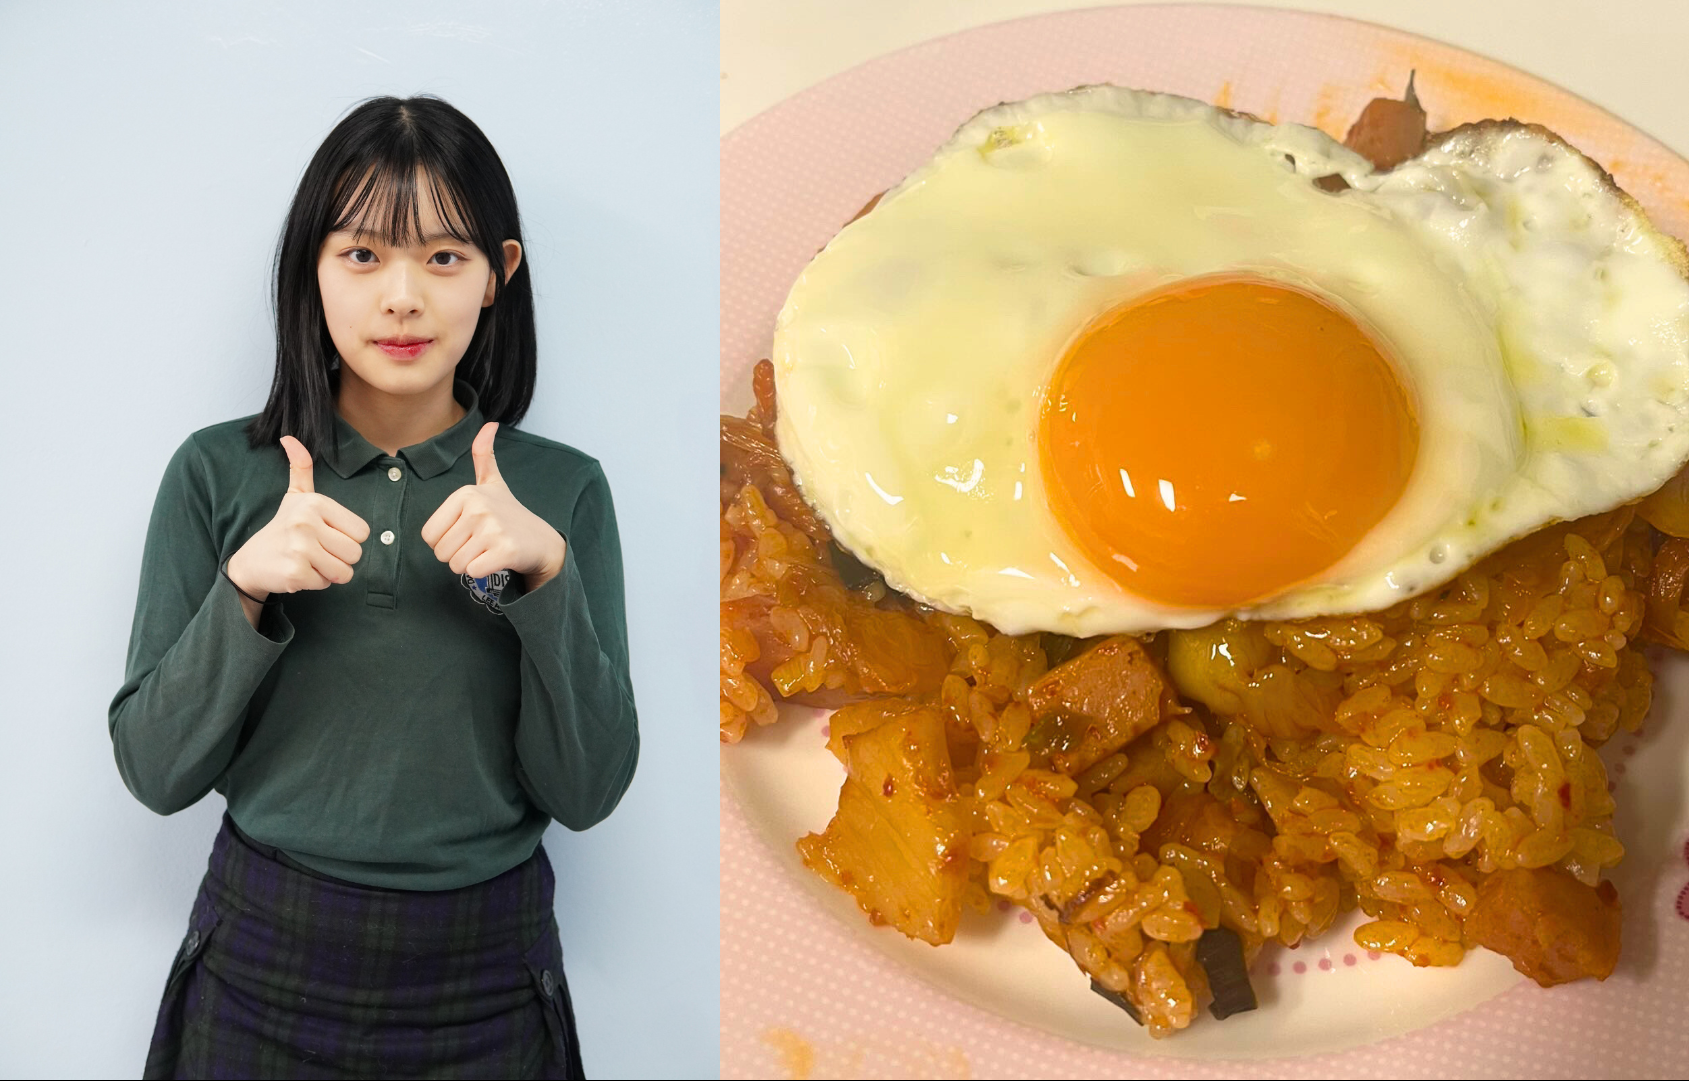 A sunny-side-up crowns a bed of kimchi fried rice filled with fiery flavor and home-style comfort. Hailey, a fledgling chef, cooked a medley of tangy kimchi and ham flavors spontaneously due to her parents sudden absence, bringing warmth and cultural flair to every forkful. 